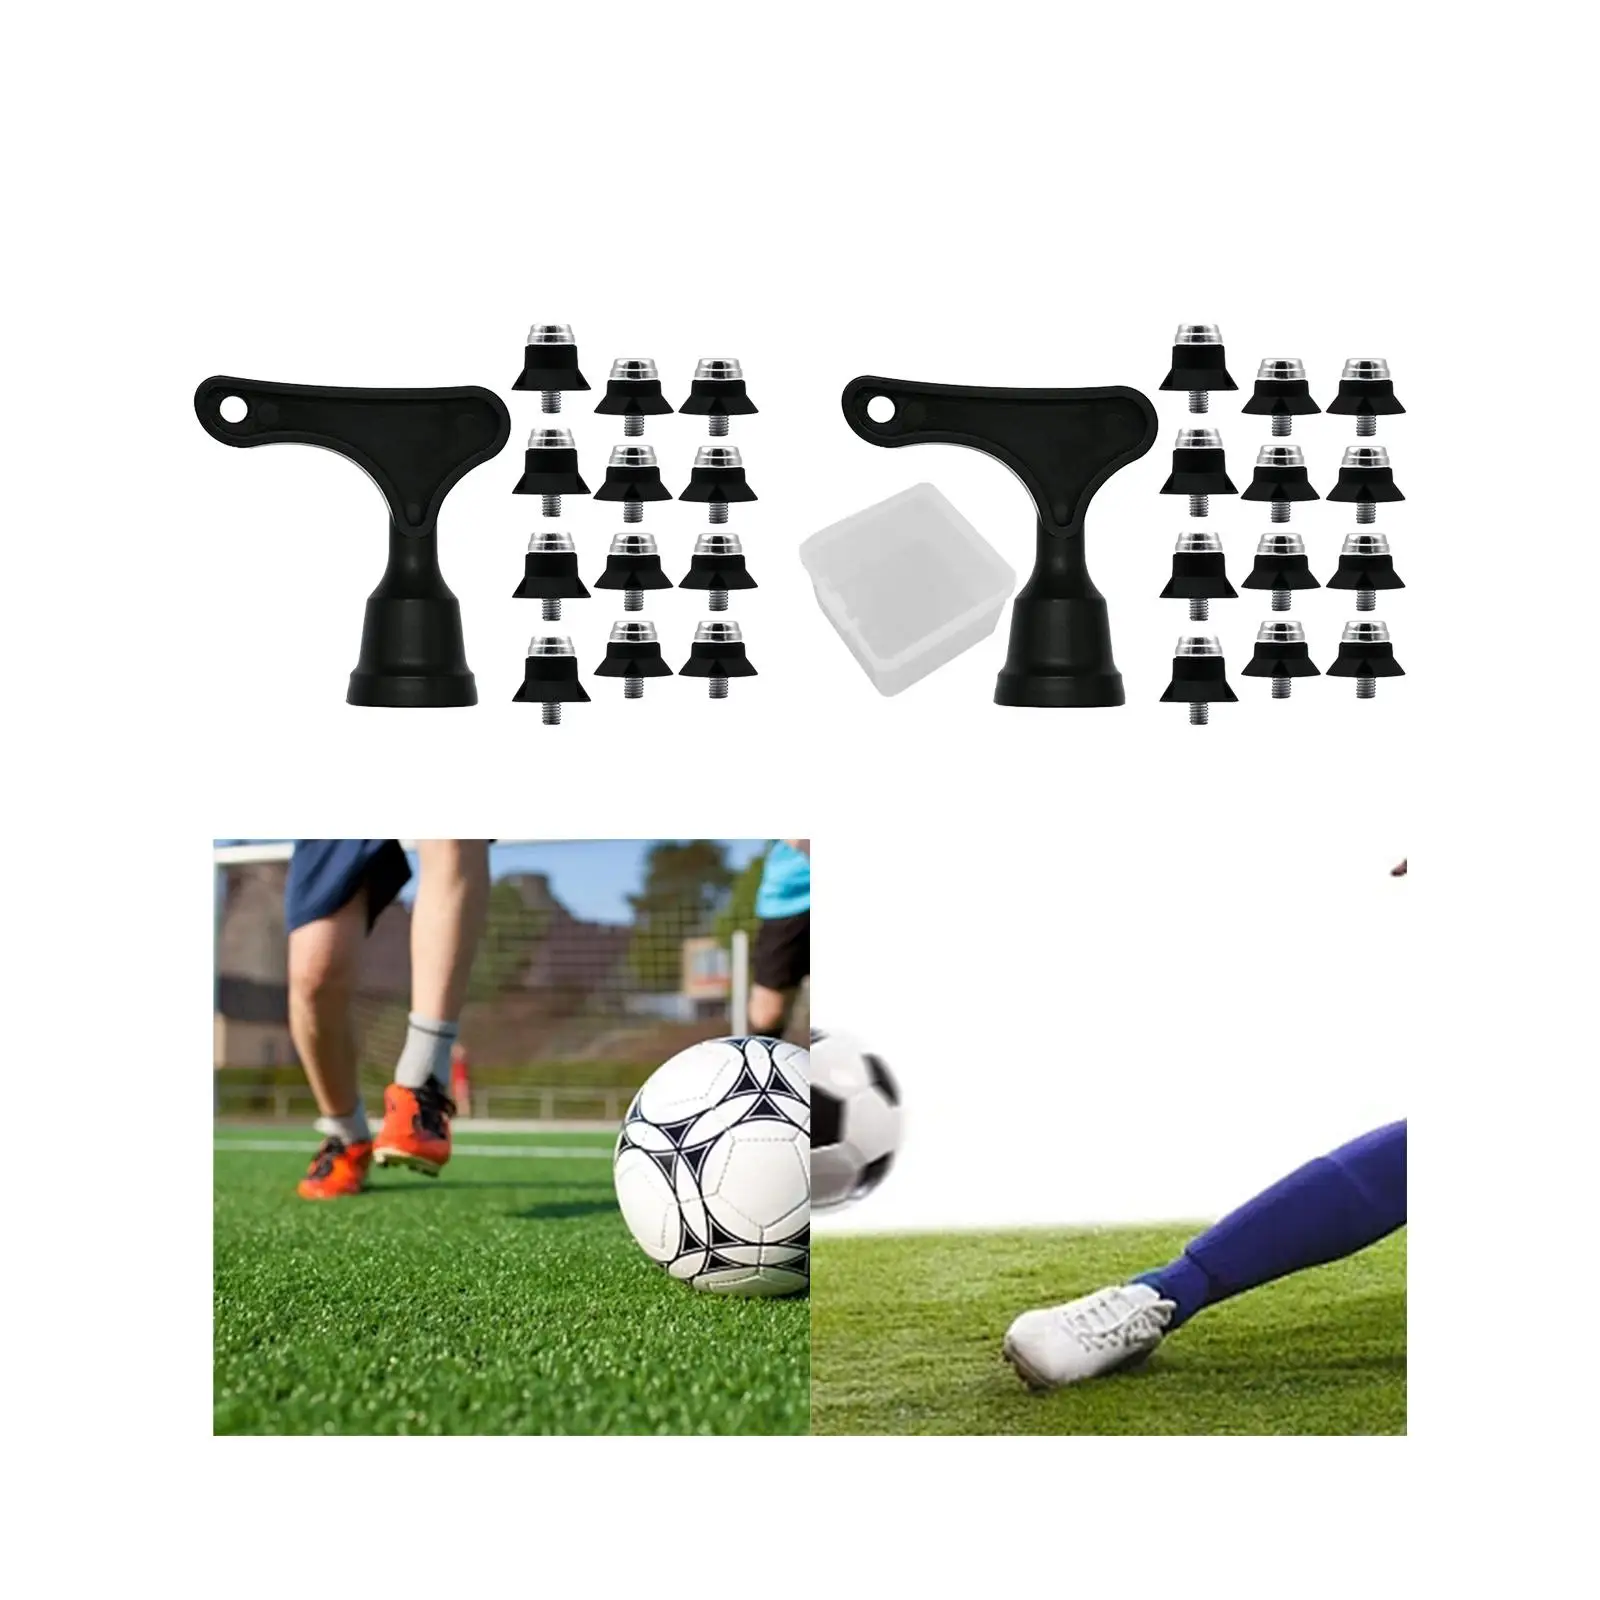 12x Soccer Boot Cleats 13mm 16mm Anti Slip Stable M5 Threaded Firm Screw in Metal Track Shoe Accessories for Training